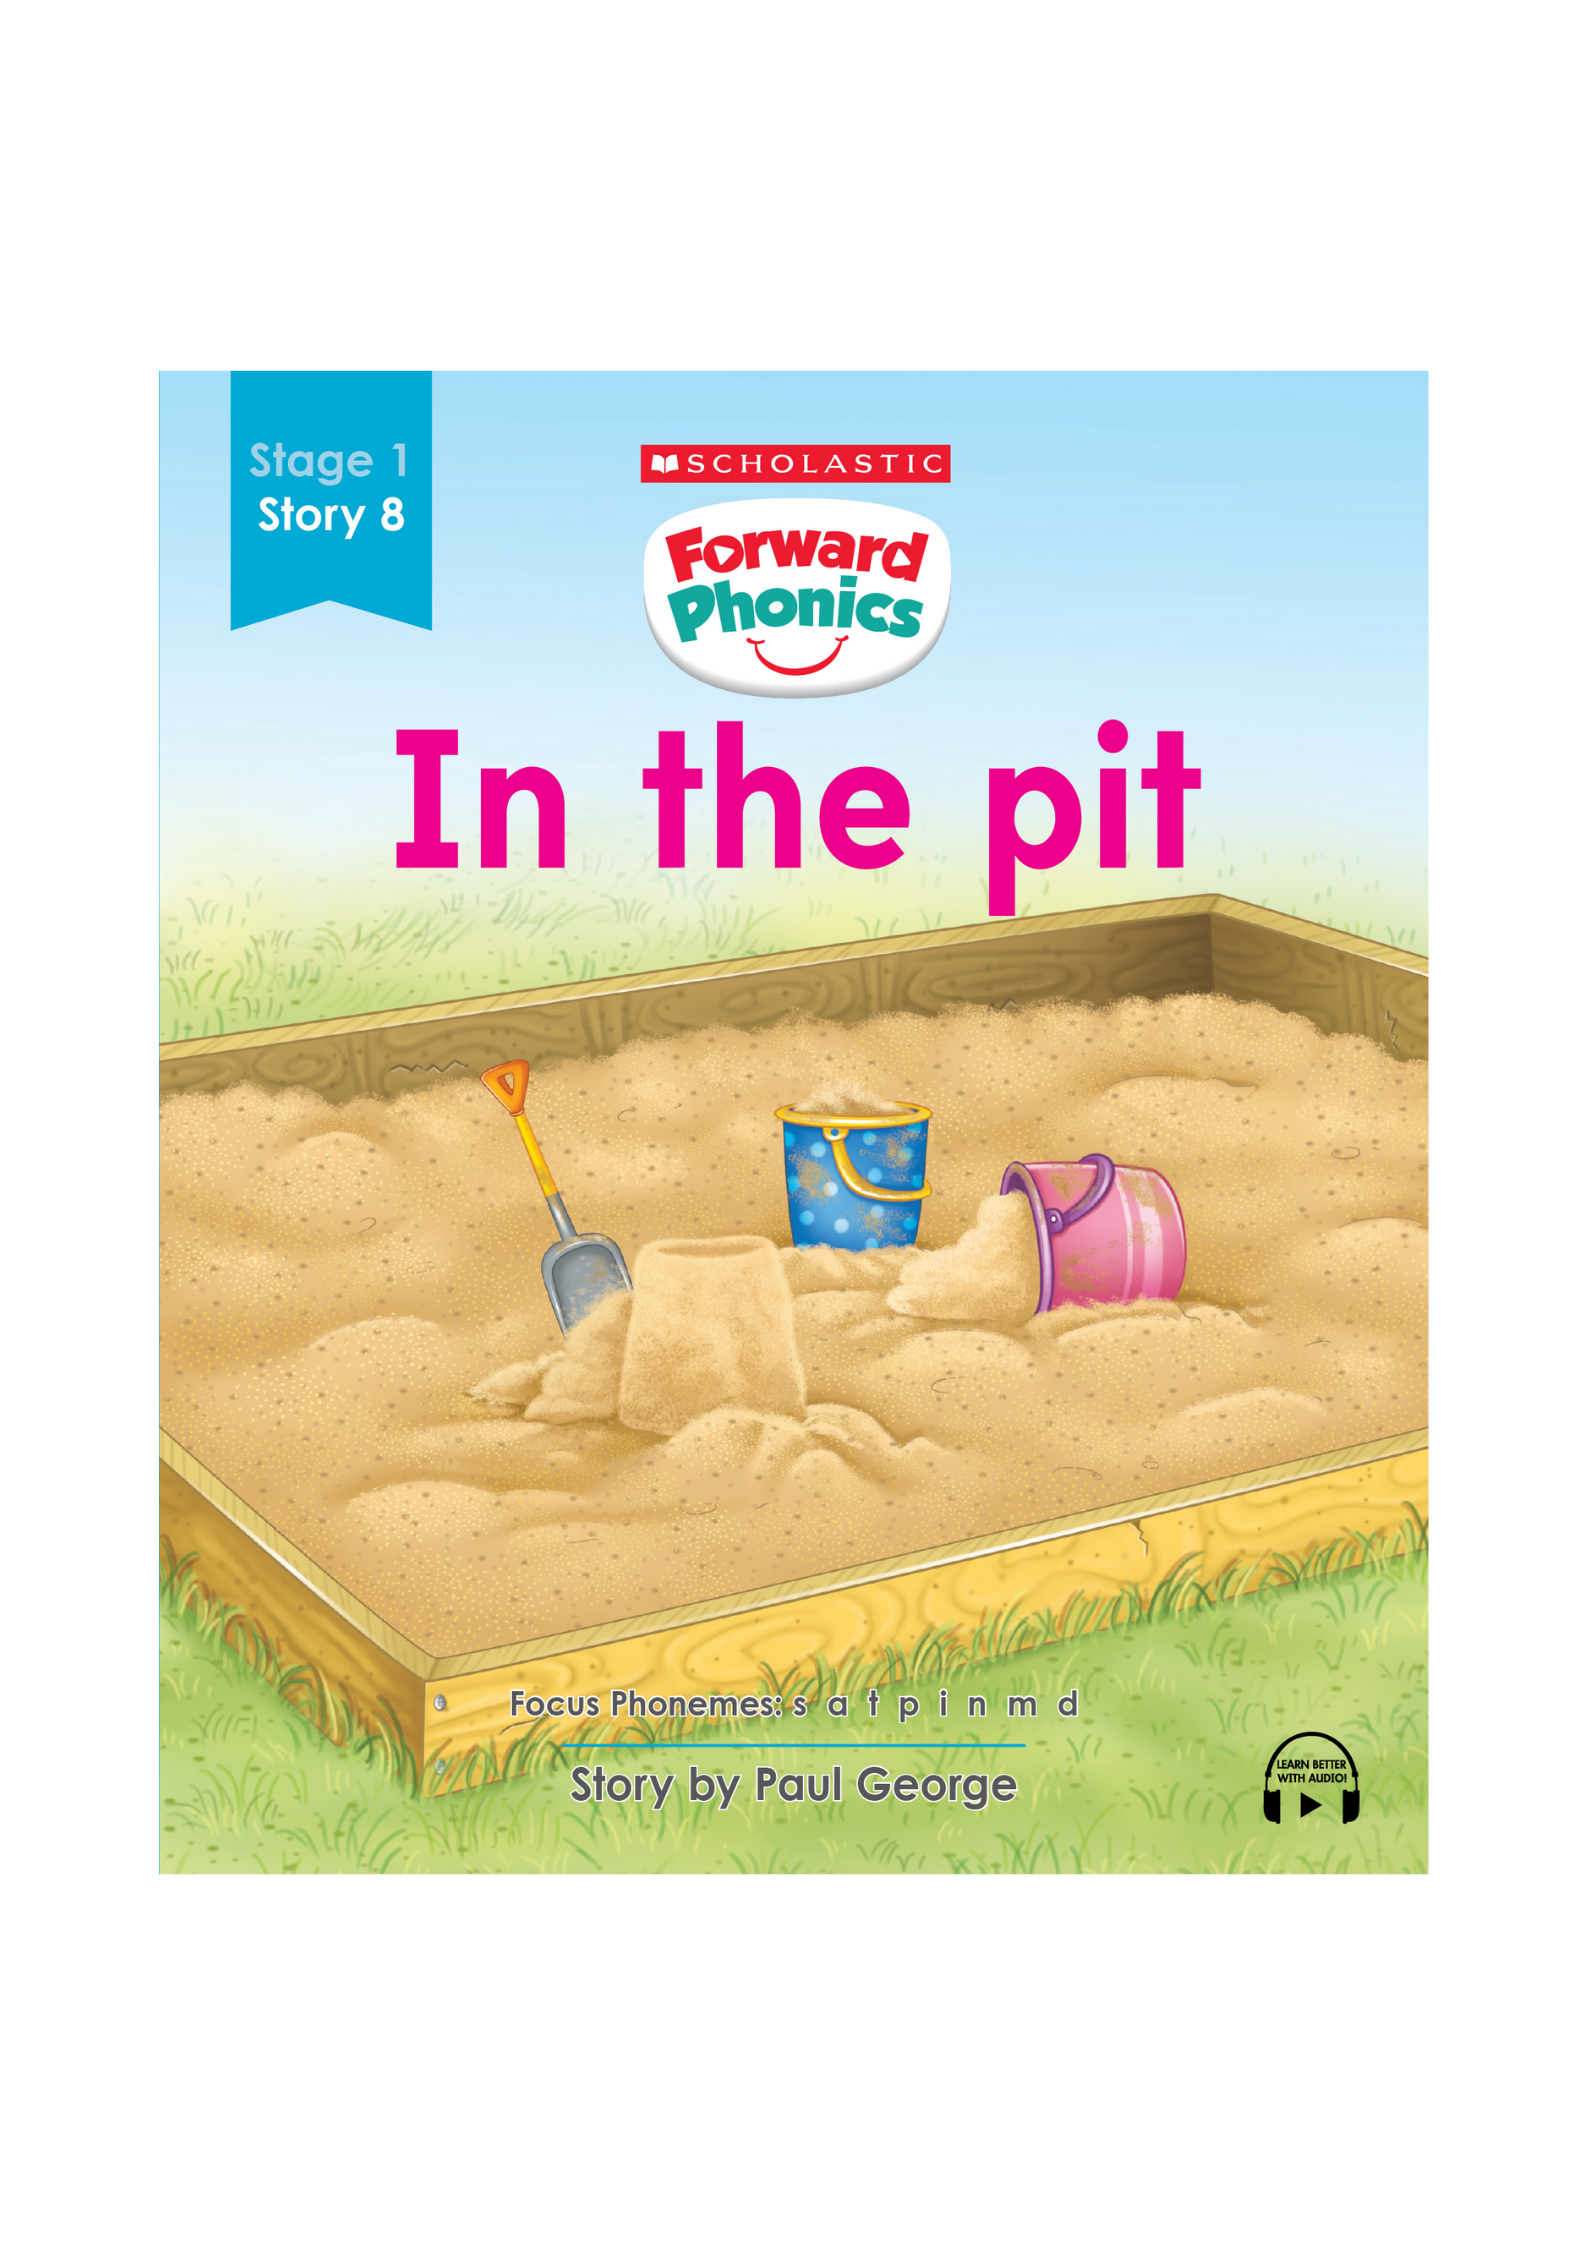 Forward Phonics #8: In the Pit